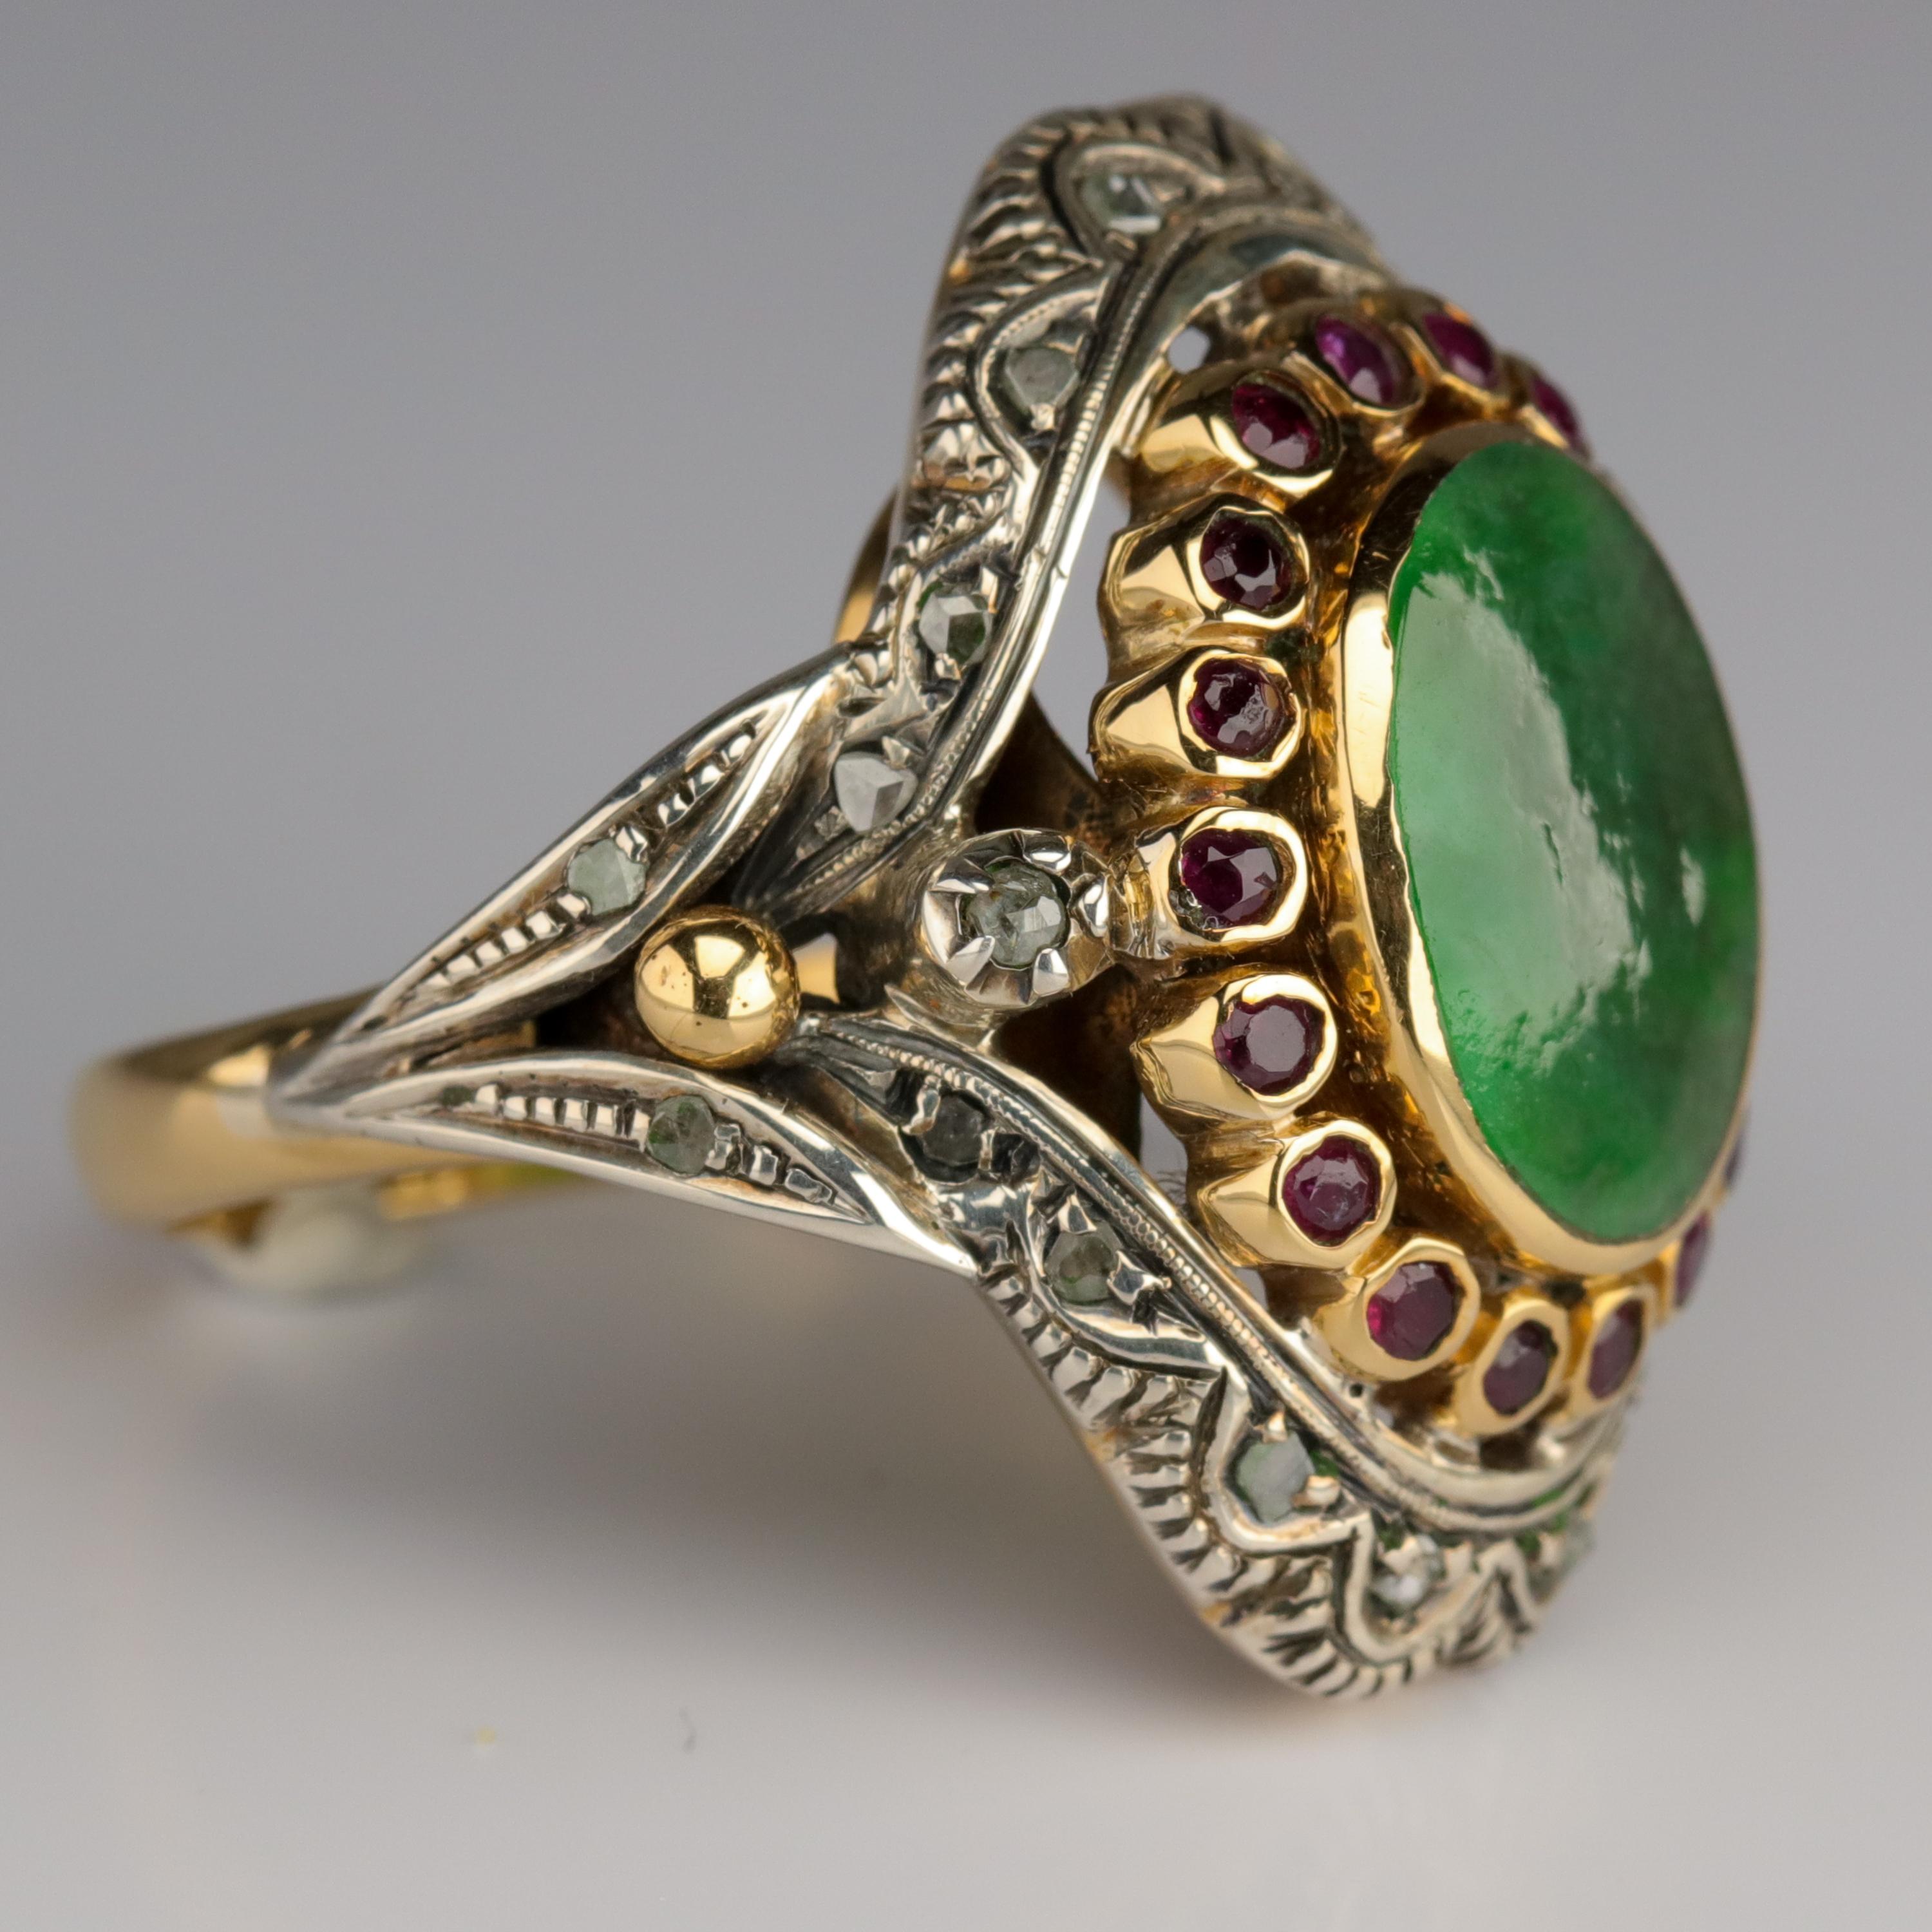 Antique Jade Ring with Rubies & Diamonds in Gold and Silver Eccentric and Ornate 4